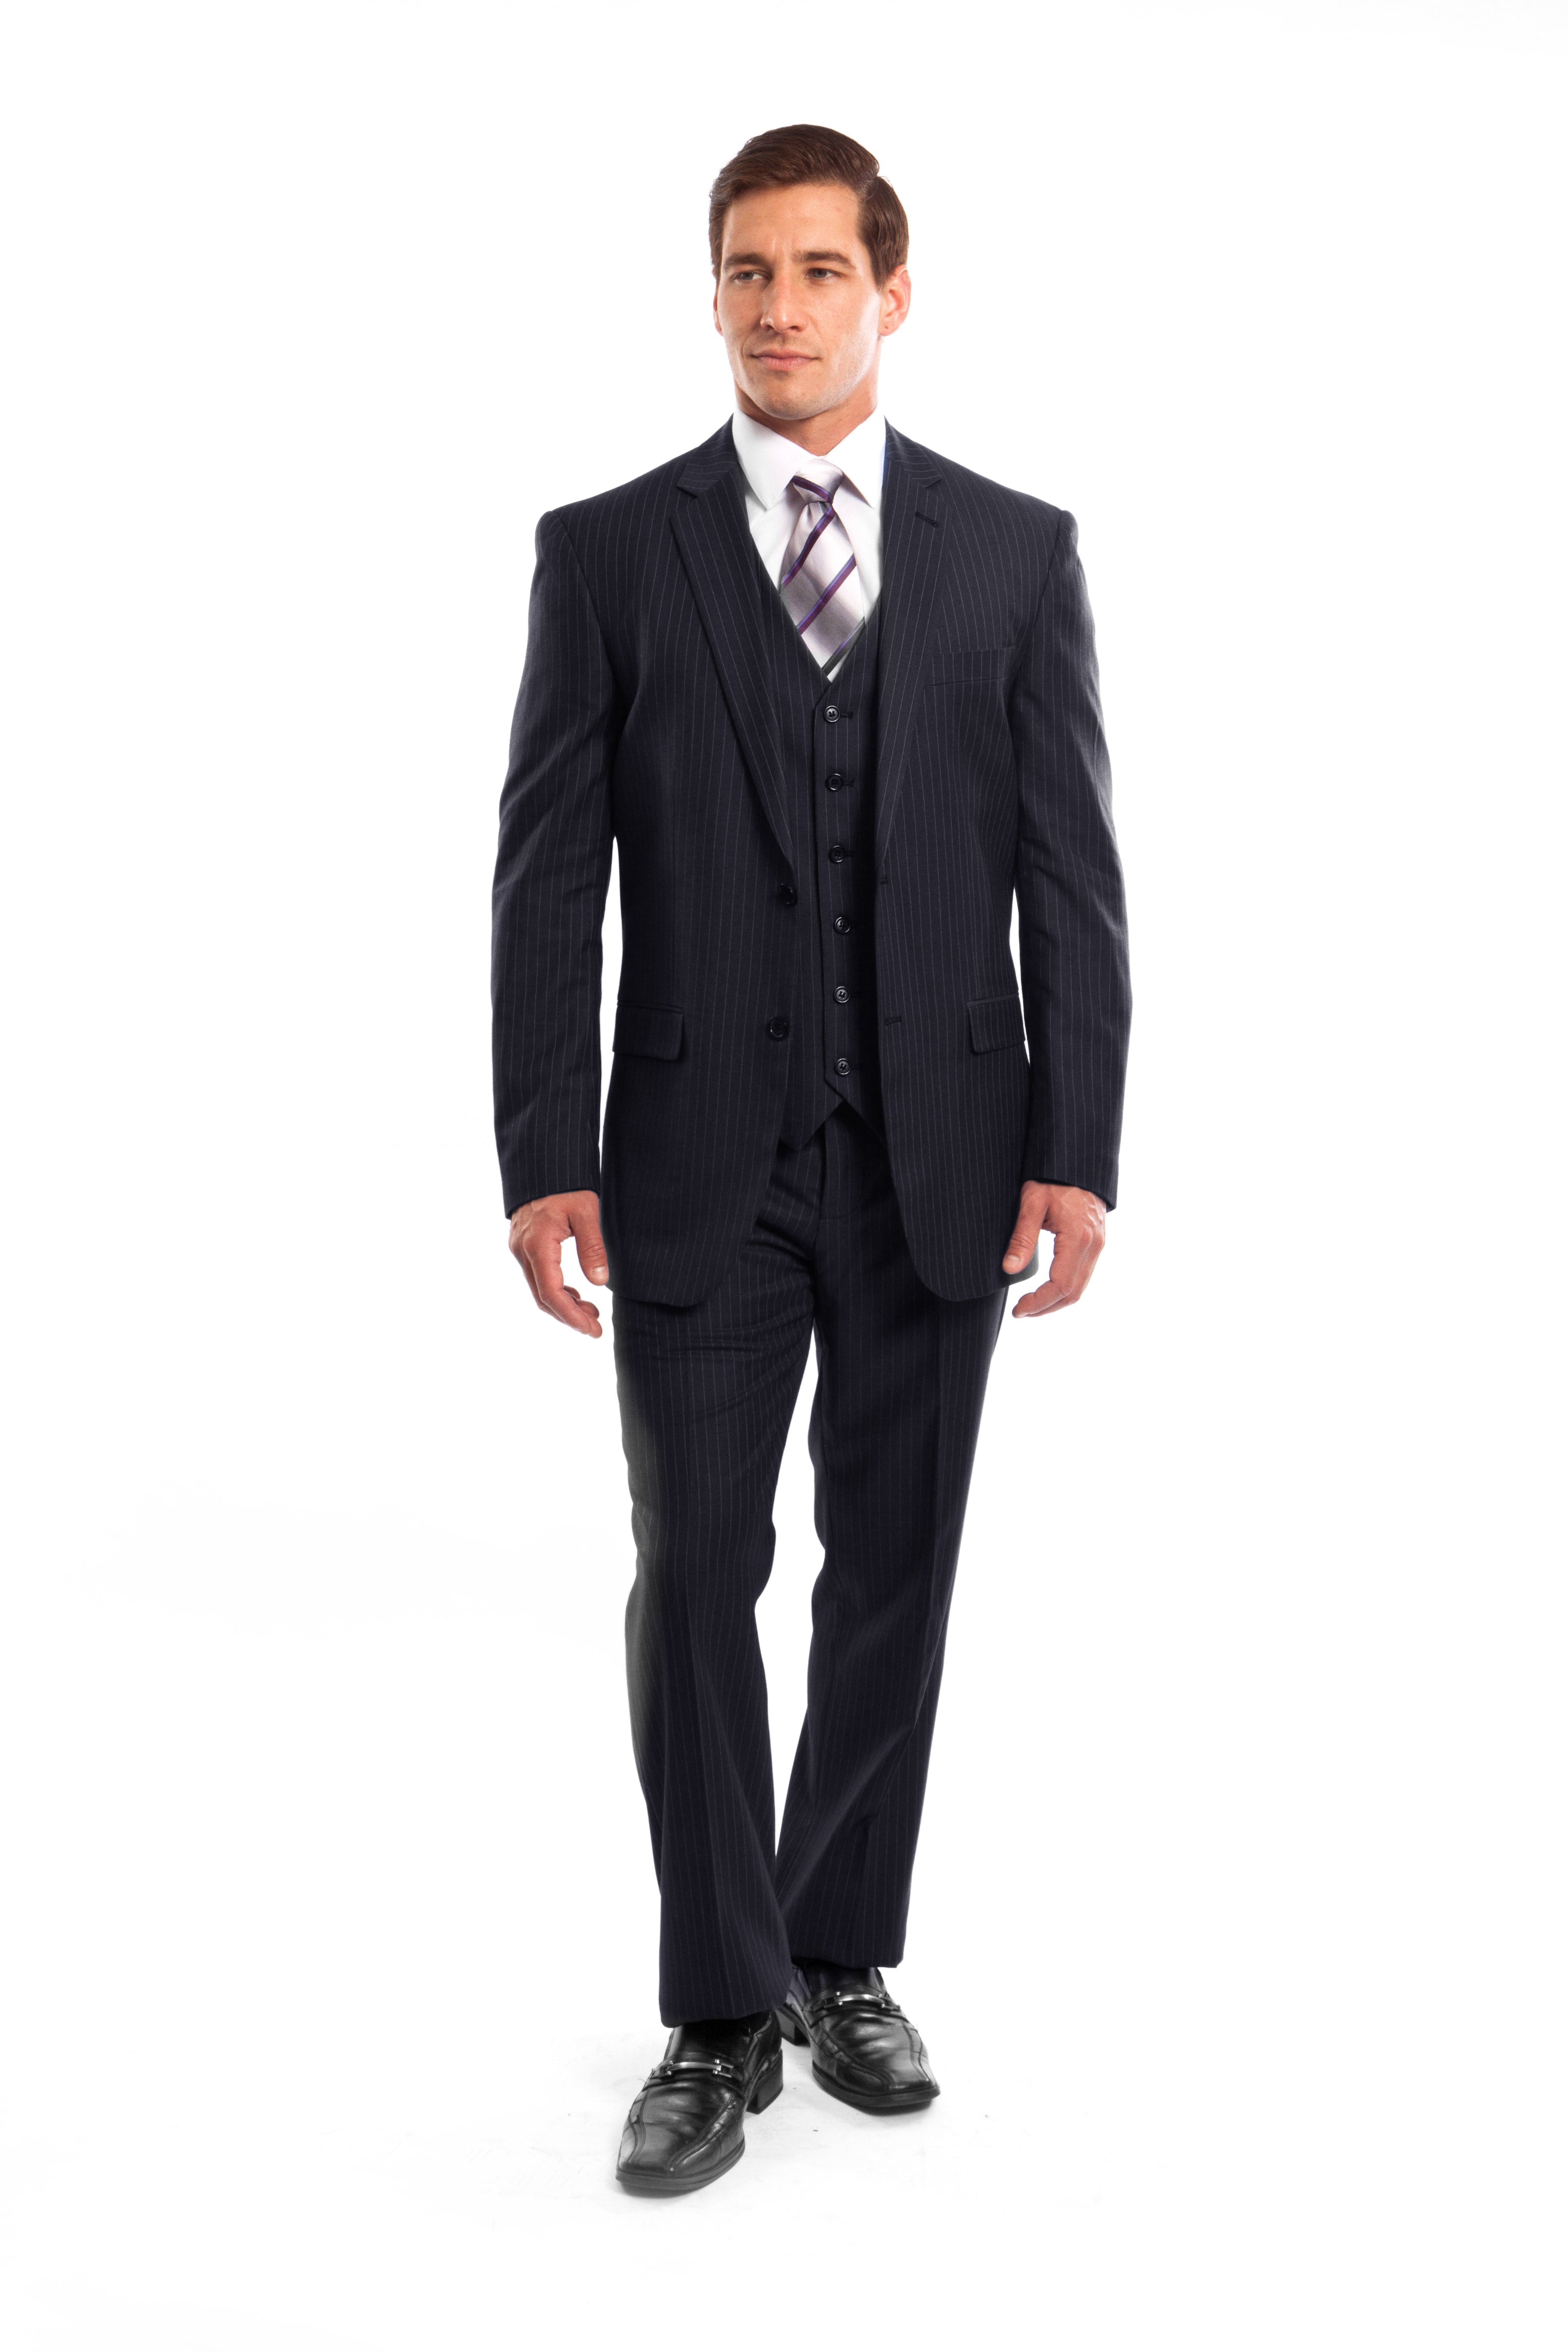 Navy Suit For Men Formal Suits For All Ocassions M120-03